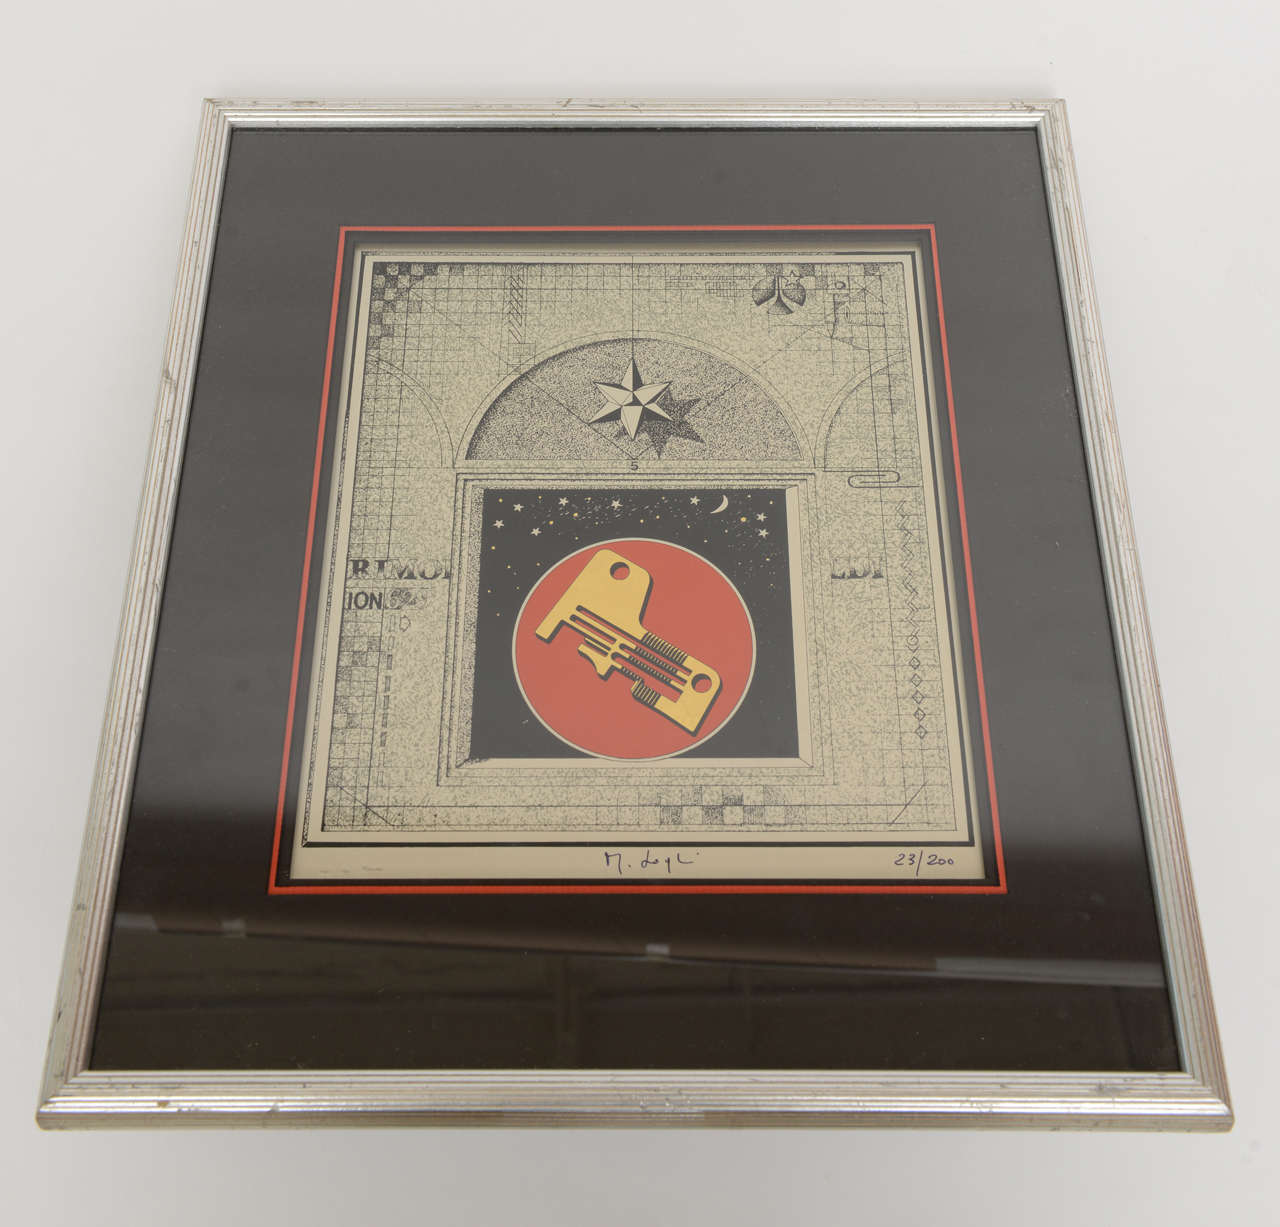 This great Italian style work of art signed by Mario Logli is a limited edition serigraph #63/200 in three colors. It has a very Fornasetii look and style to it. This is the original frame it came with. It has its own red folder in the back. All in